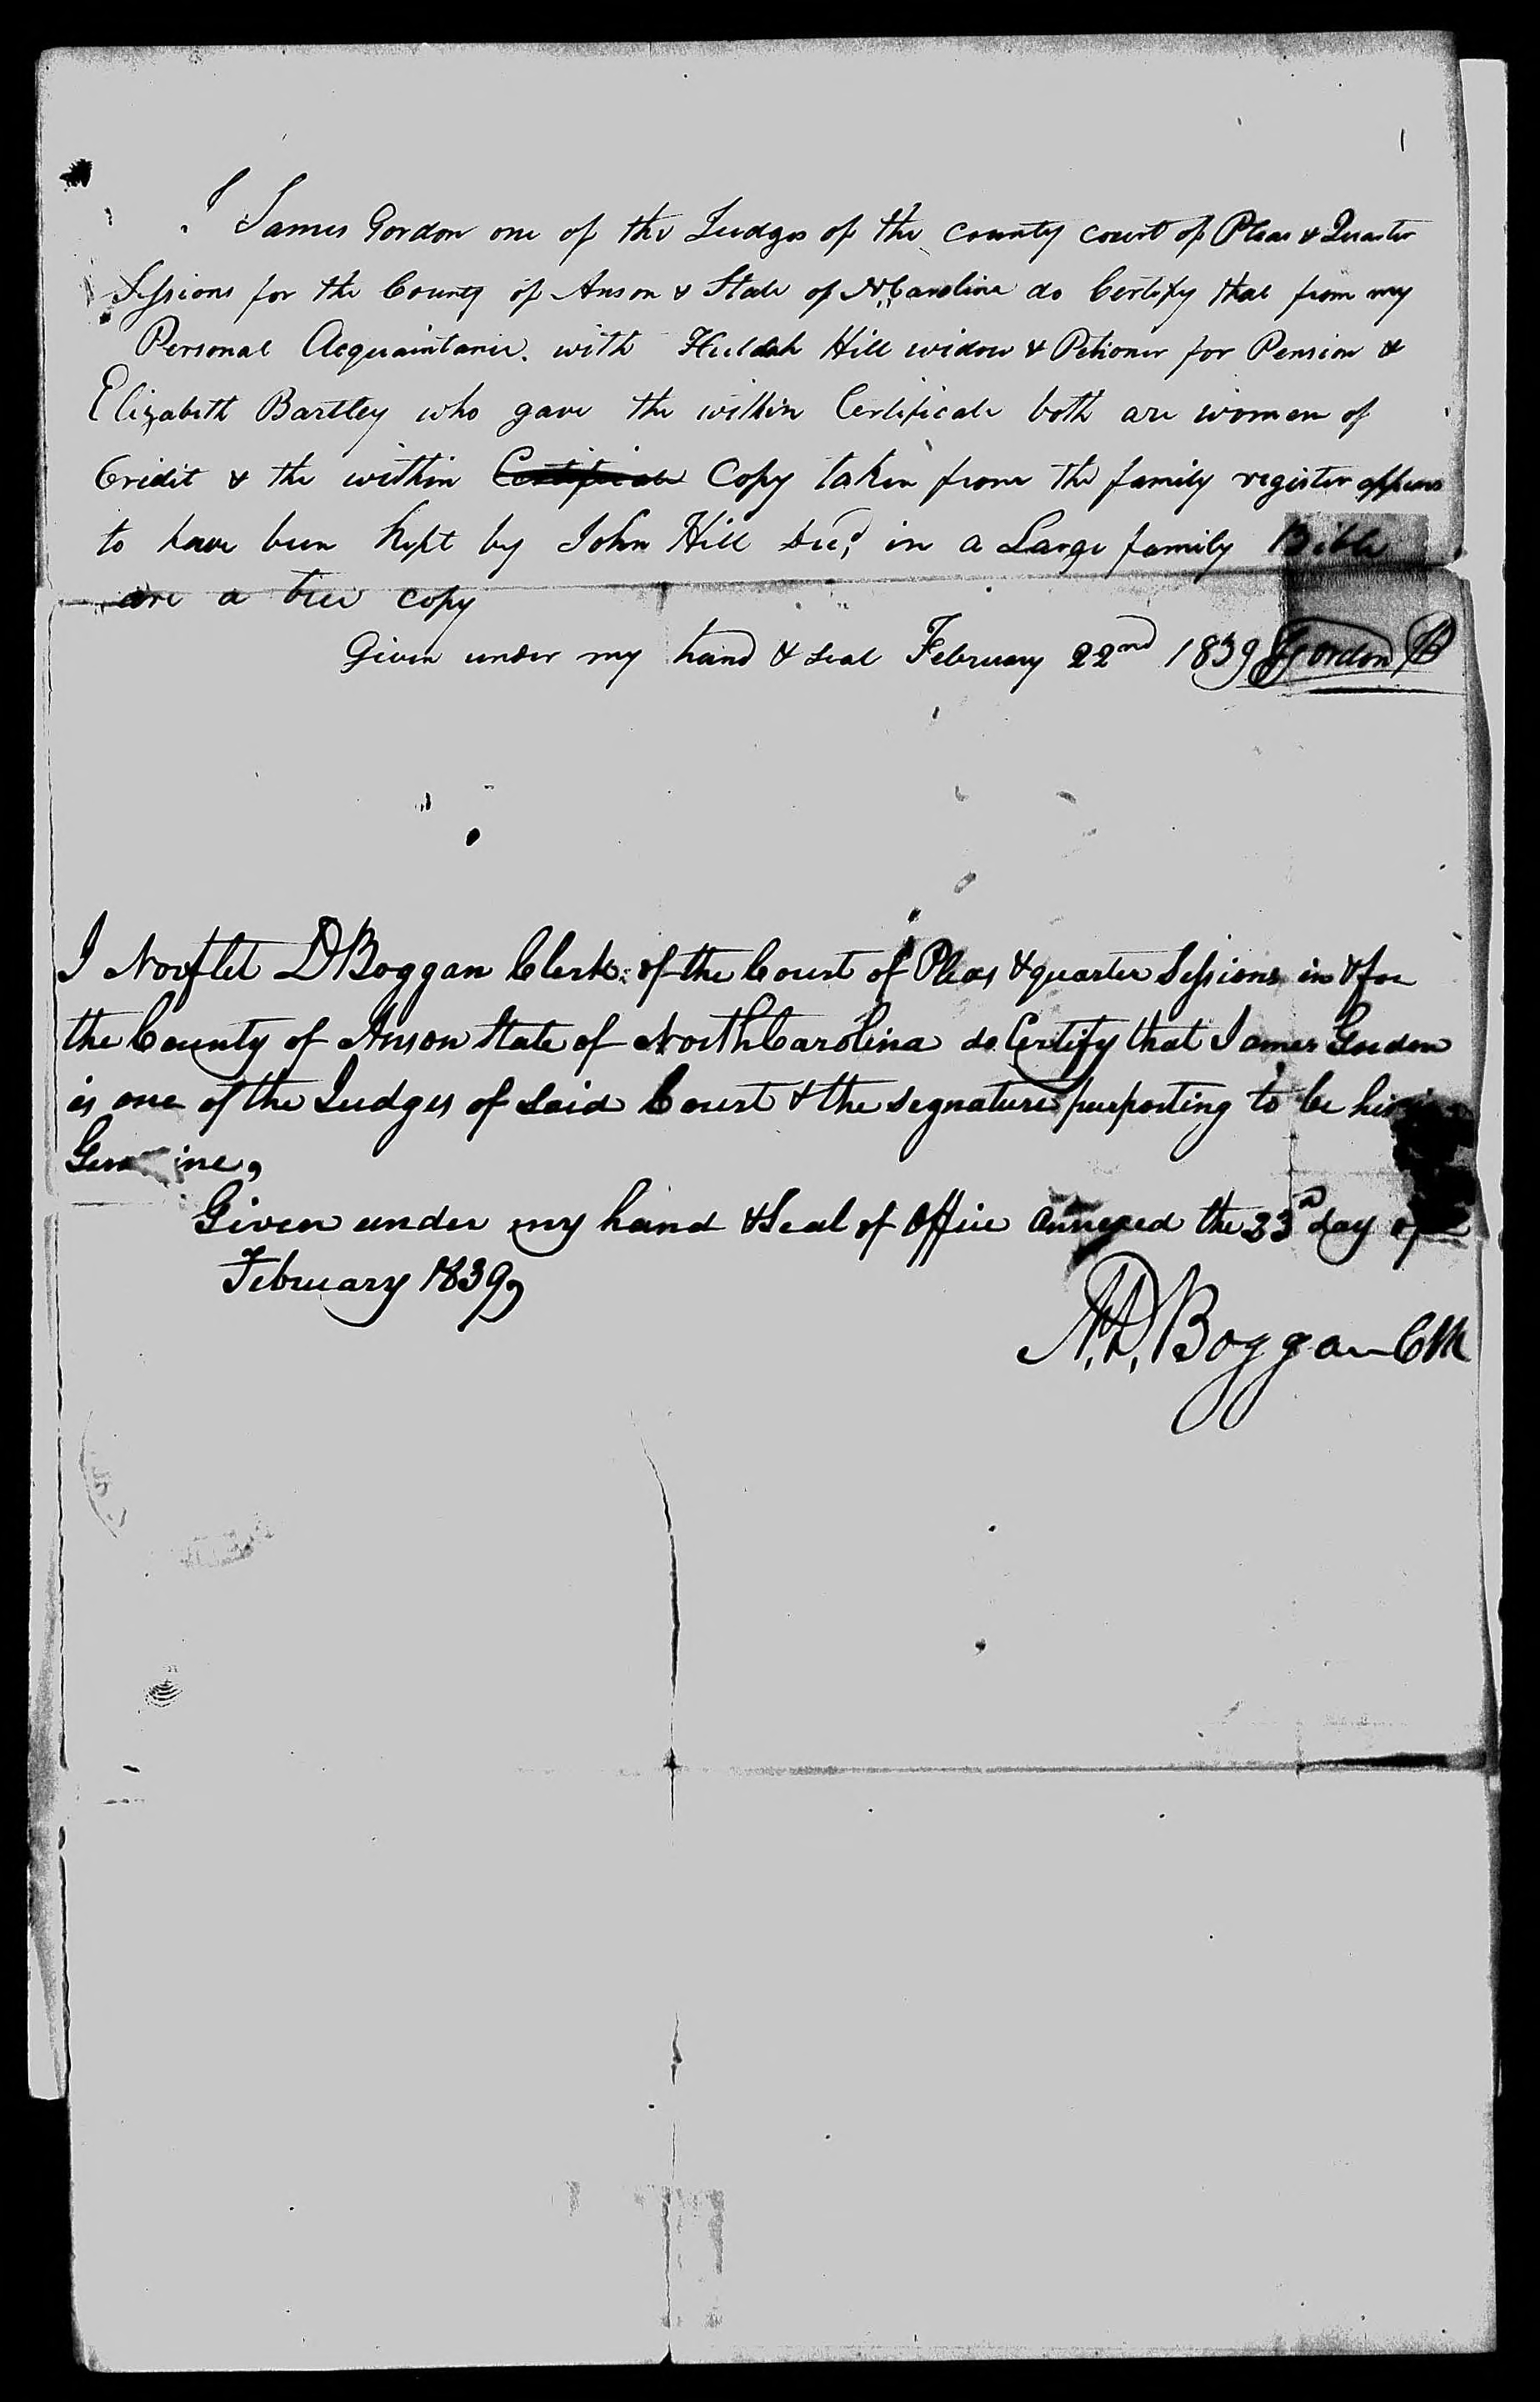 Affidavit of Huldah Hill in support of her Pension Claim, 22 February 1839, page 3